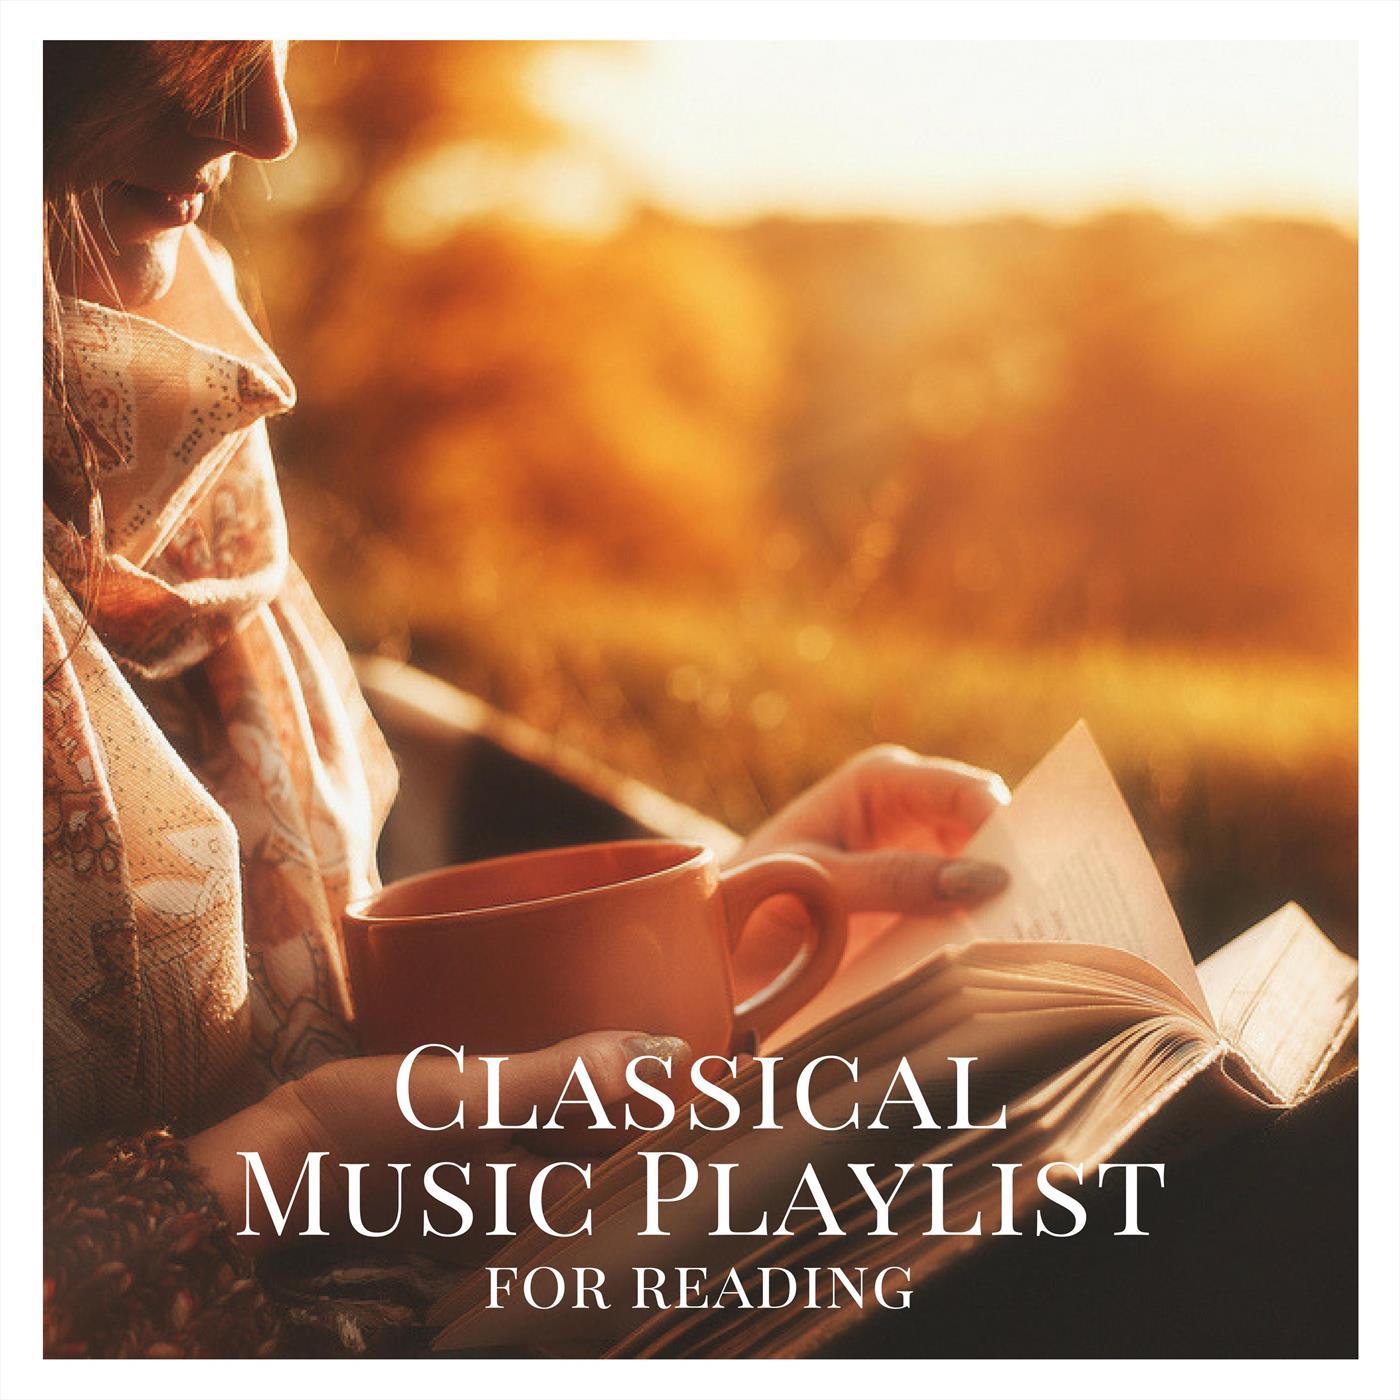 Classical Music Playlist for Reading